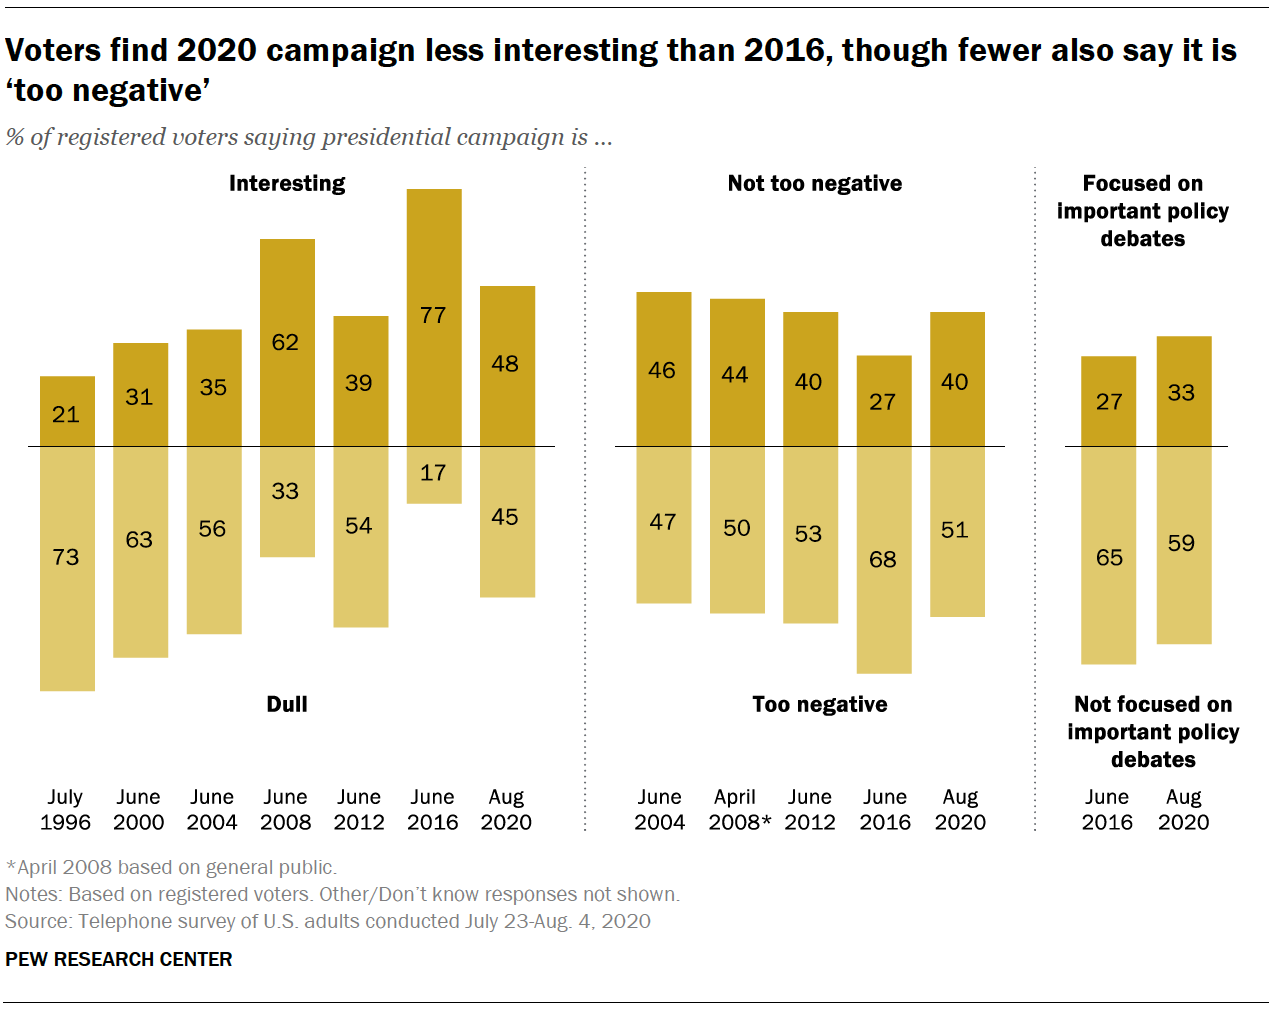 Voters find 2020 campaign less interesting than 2016, though fewer also say it is ‘too negative’